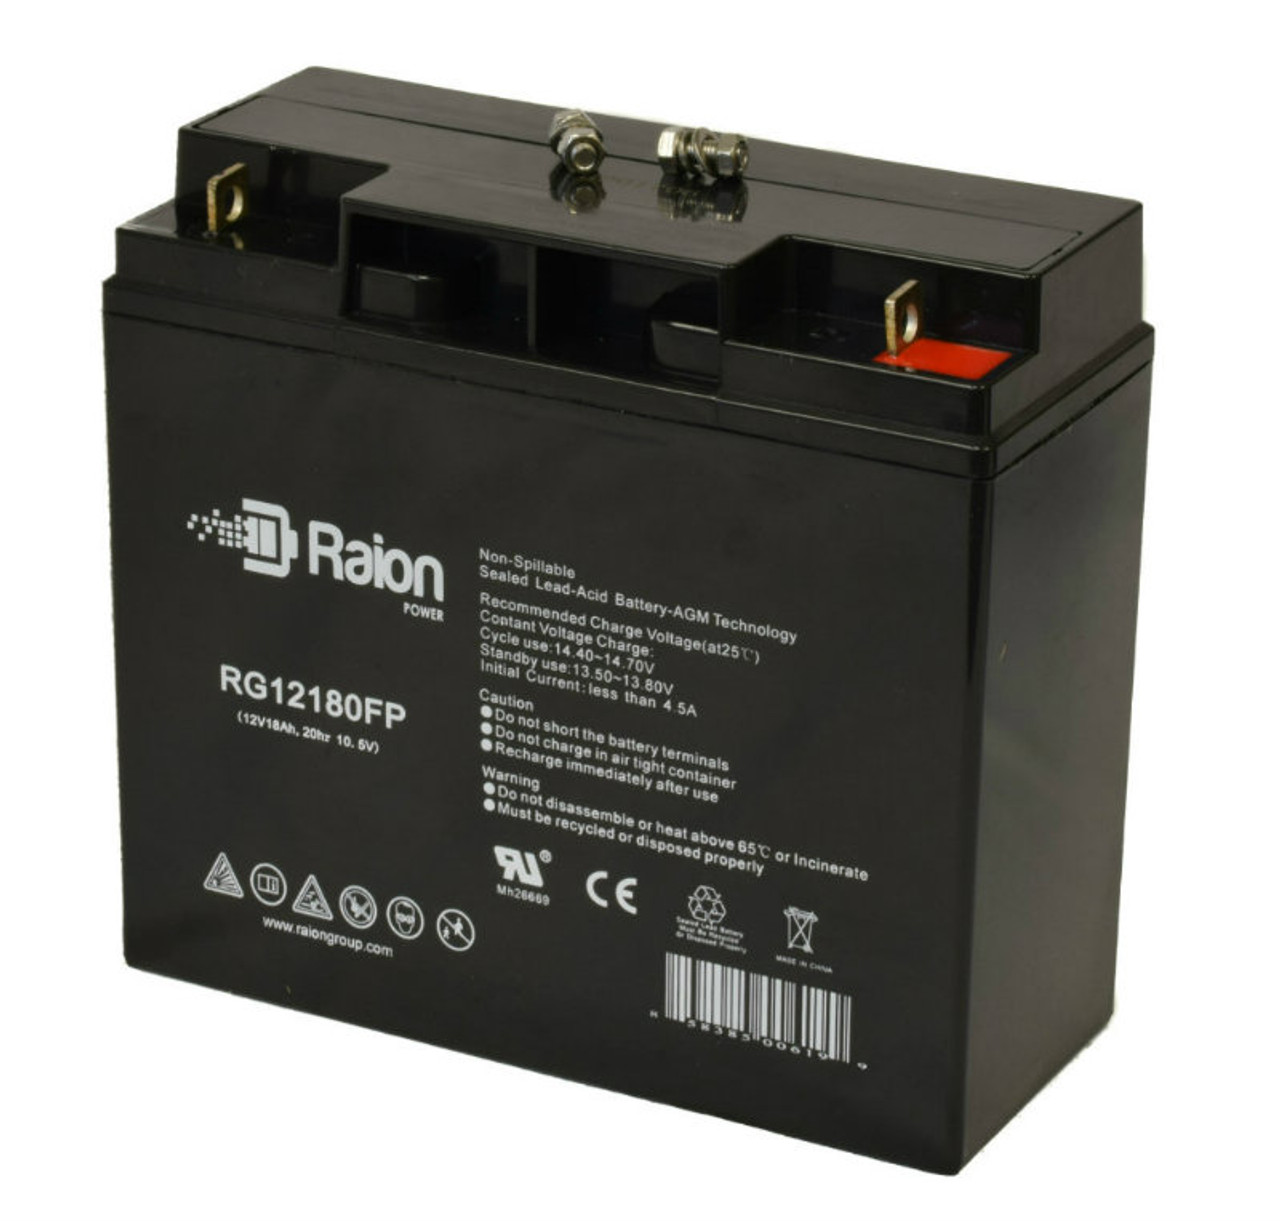 Raion Power Replacement 12V 18Ah Emergency Light Battery for Big Beam 2IL24S15 - 1 Pack